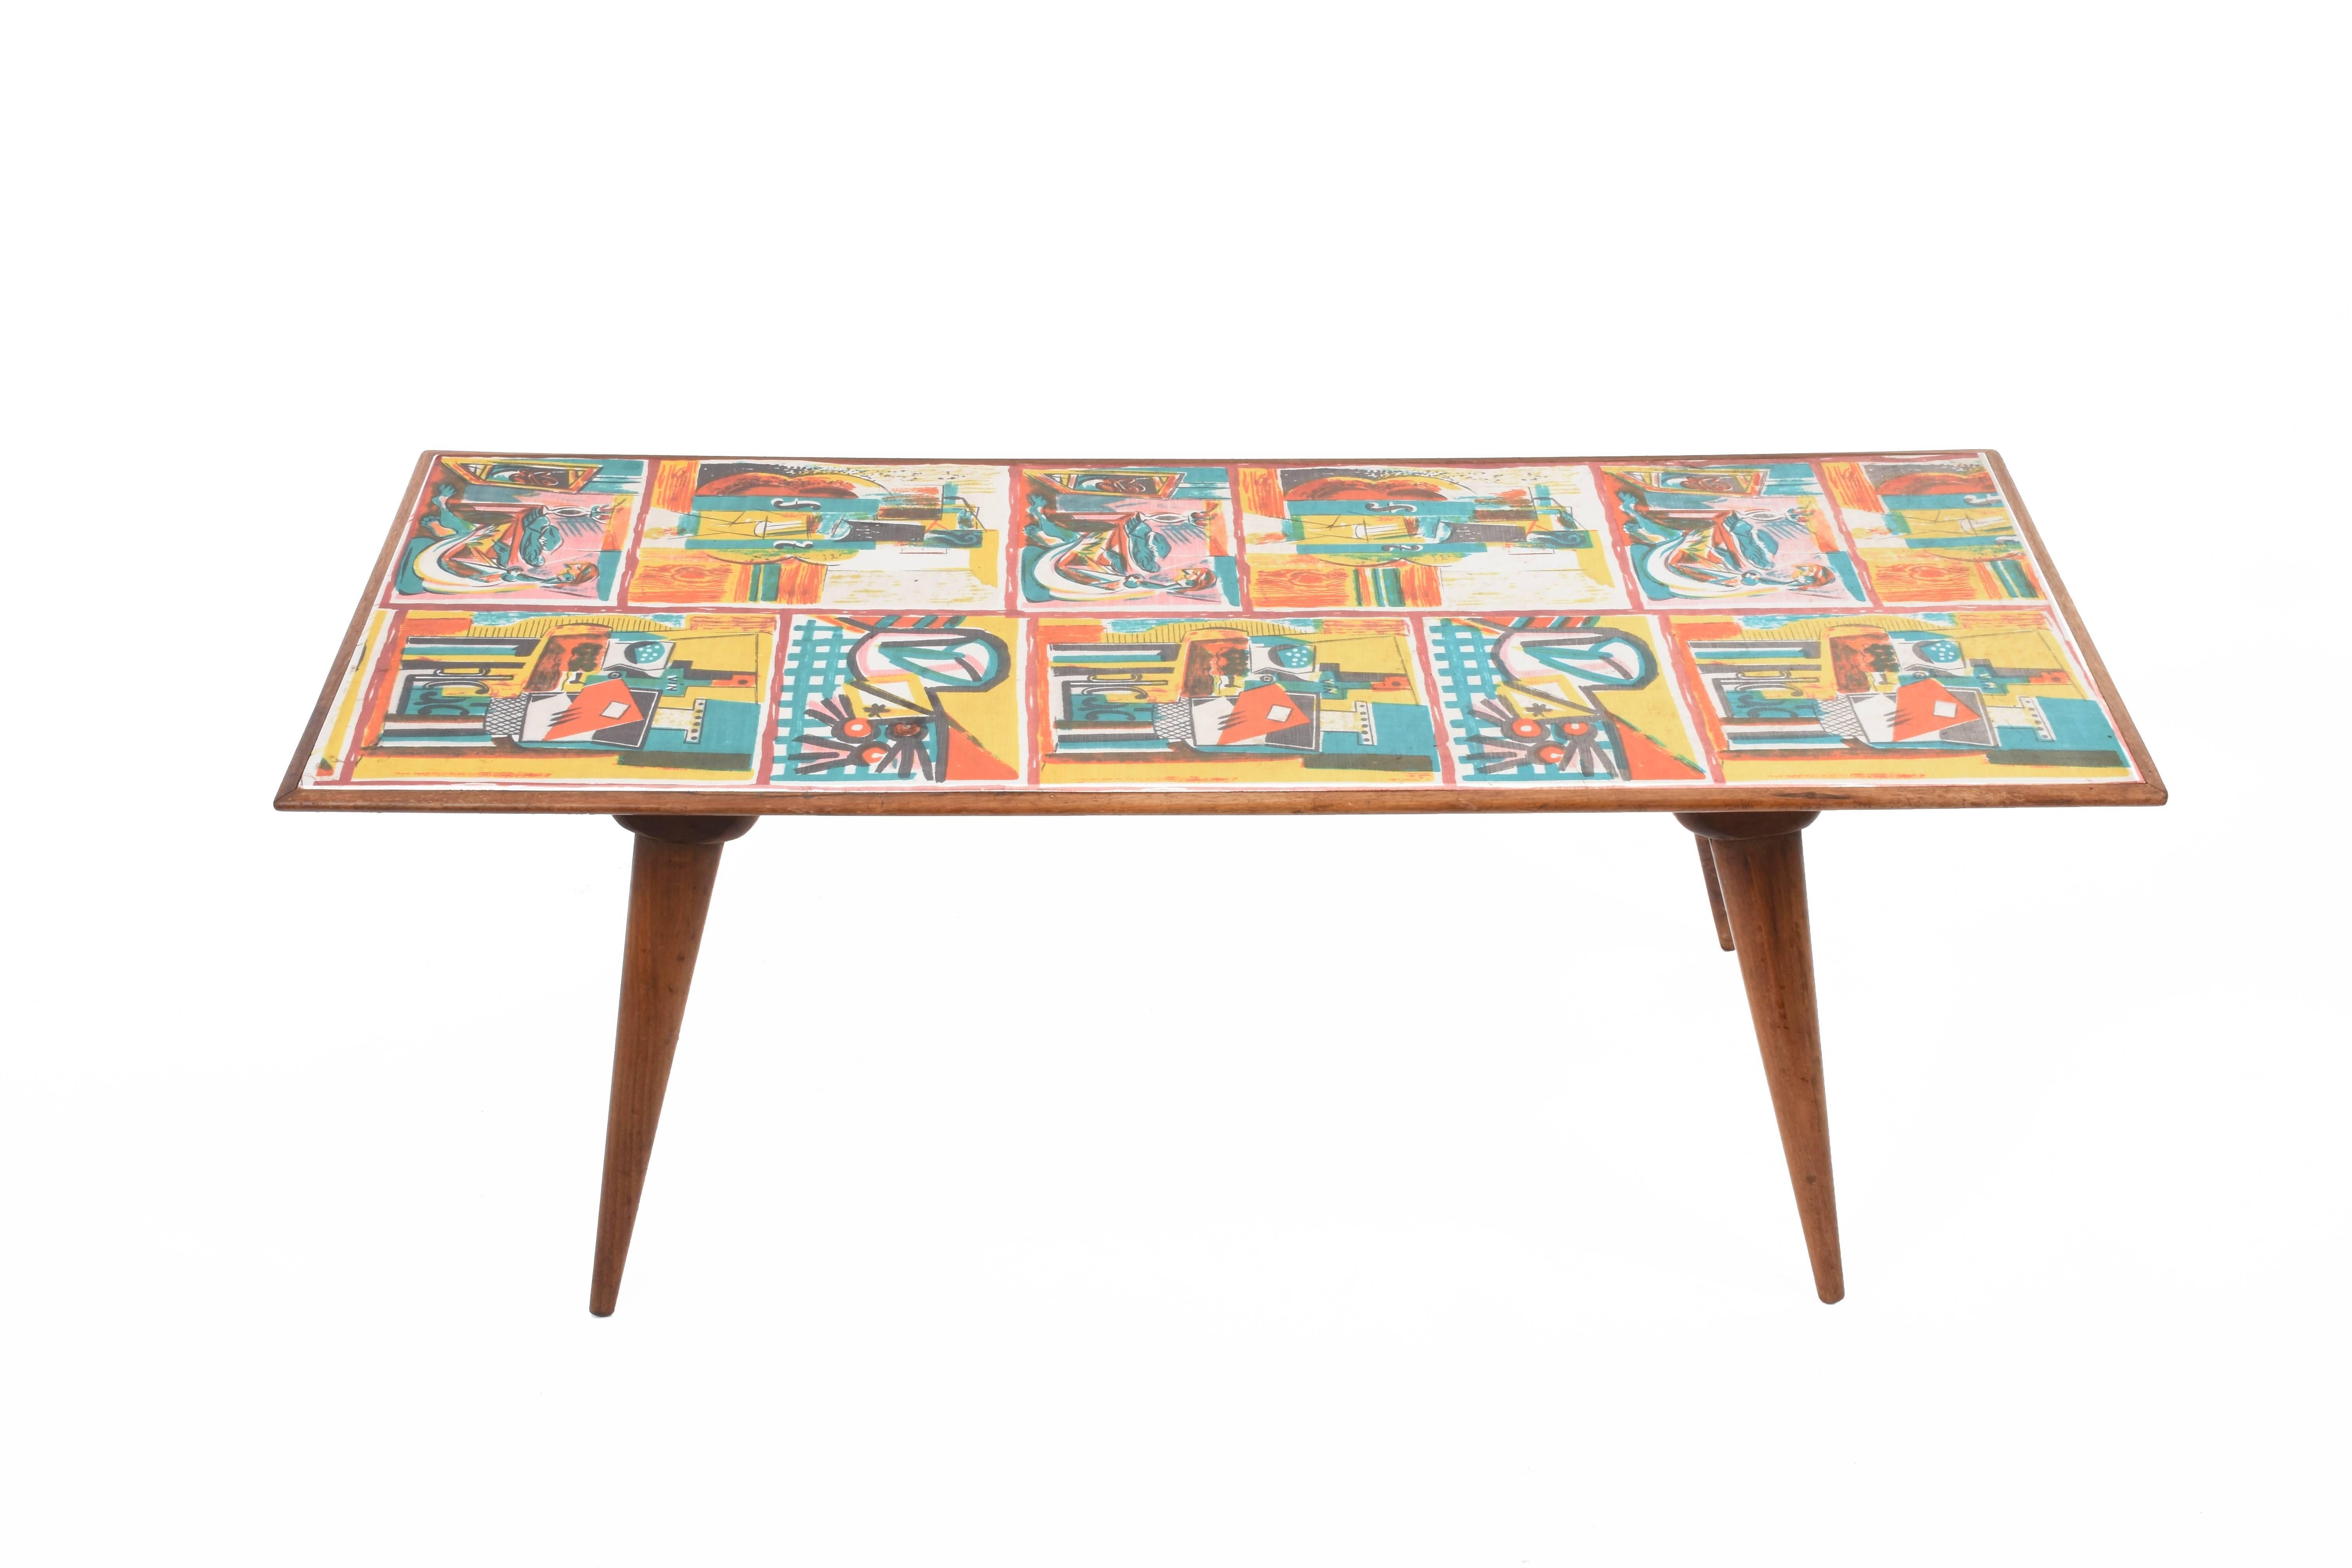 Midcentury Printed Wood and Plastic Italian Coffee Table after De Poli, 1950s For Sale 4